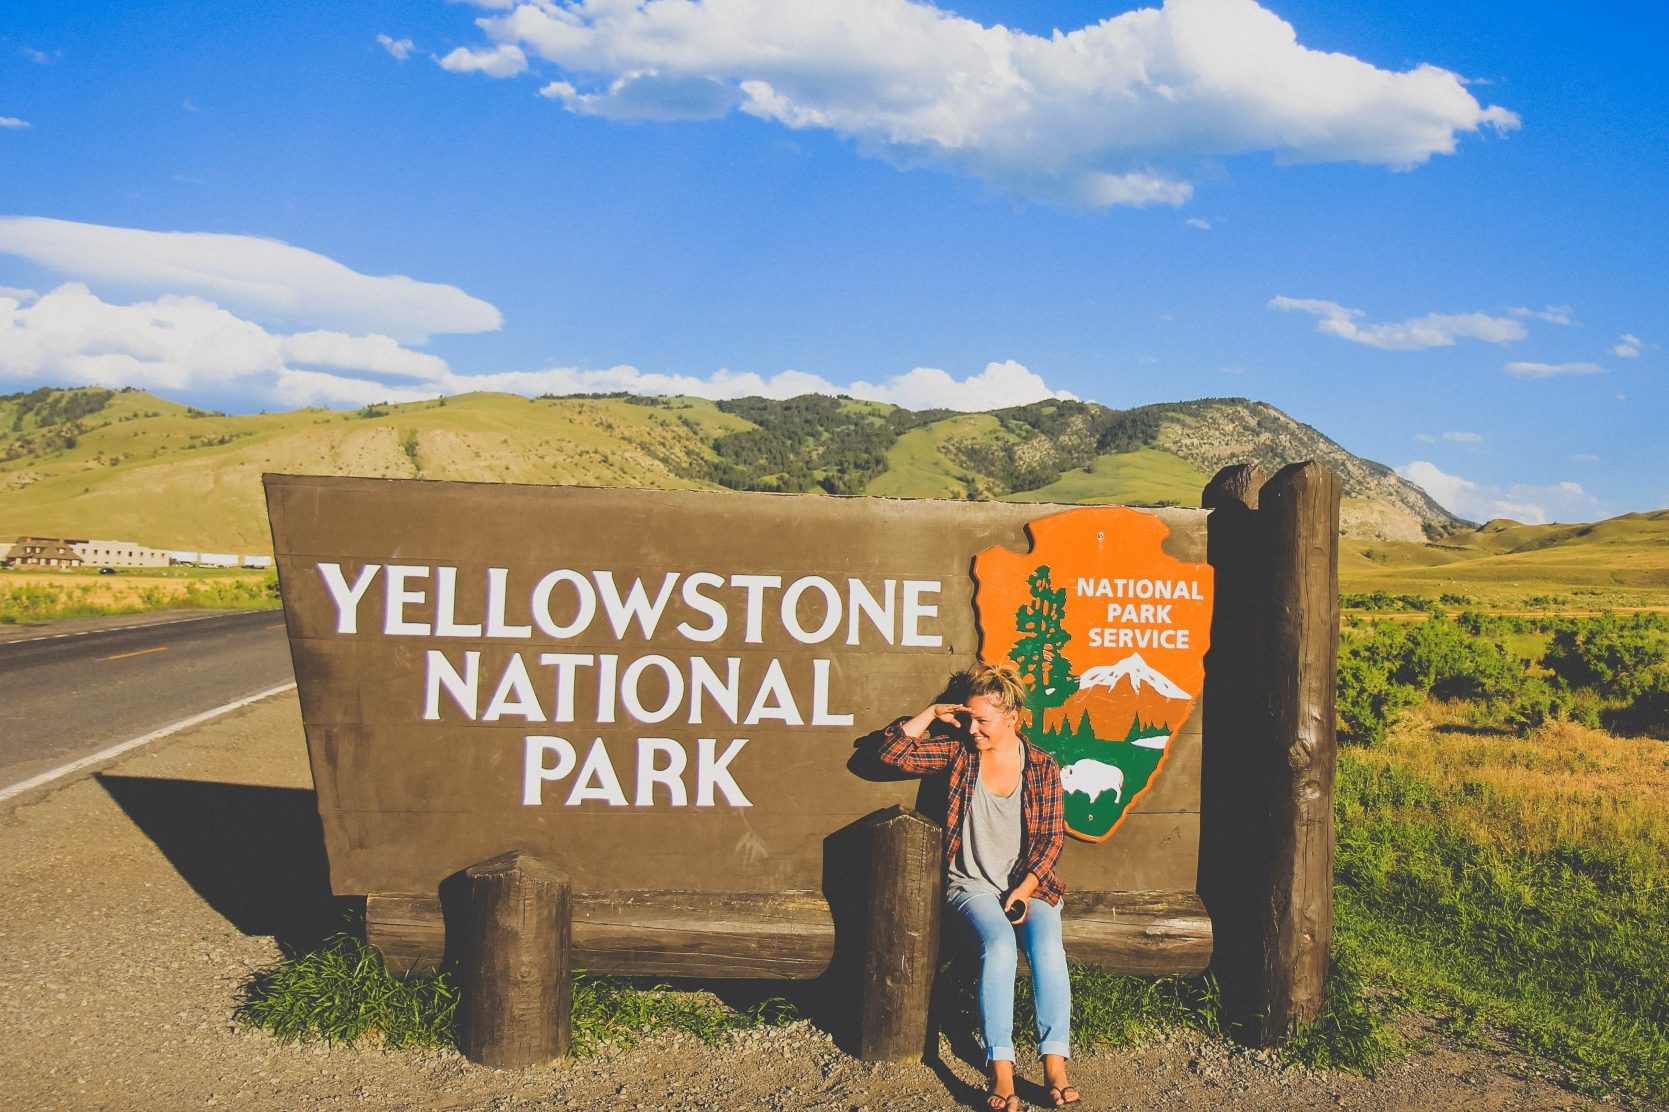 Yellowstone national park entrance for camping.